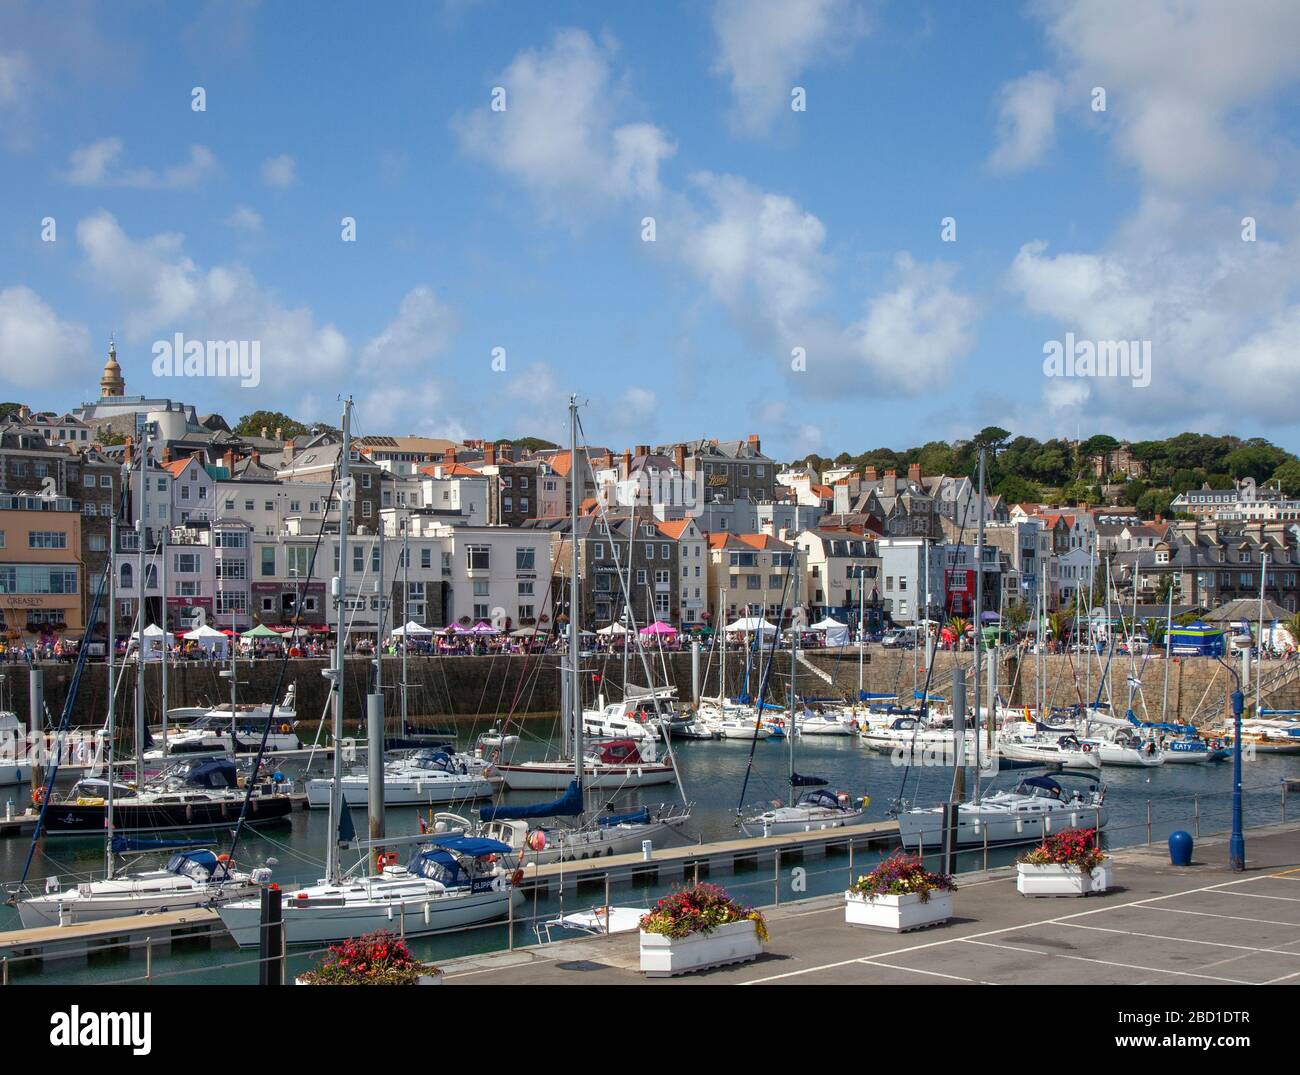 Boat Basin and Waterfront, St. Peter Port, Insel Guernsey, Großbritannien Stockfoto